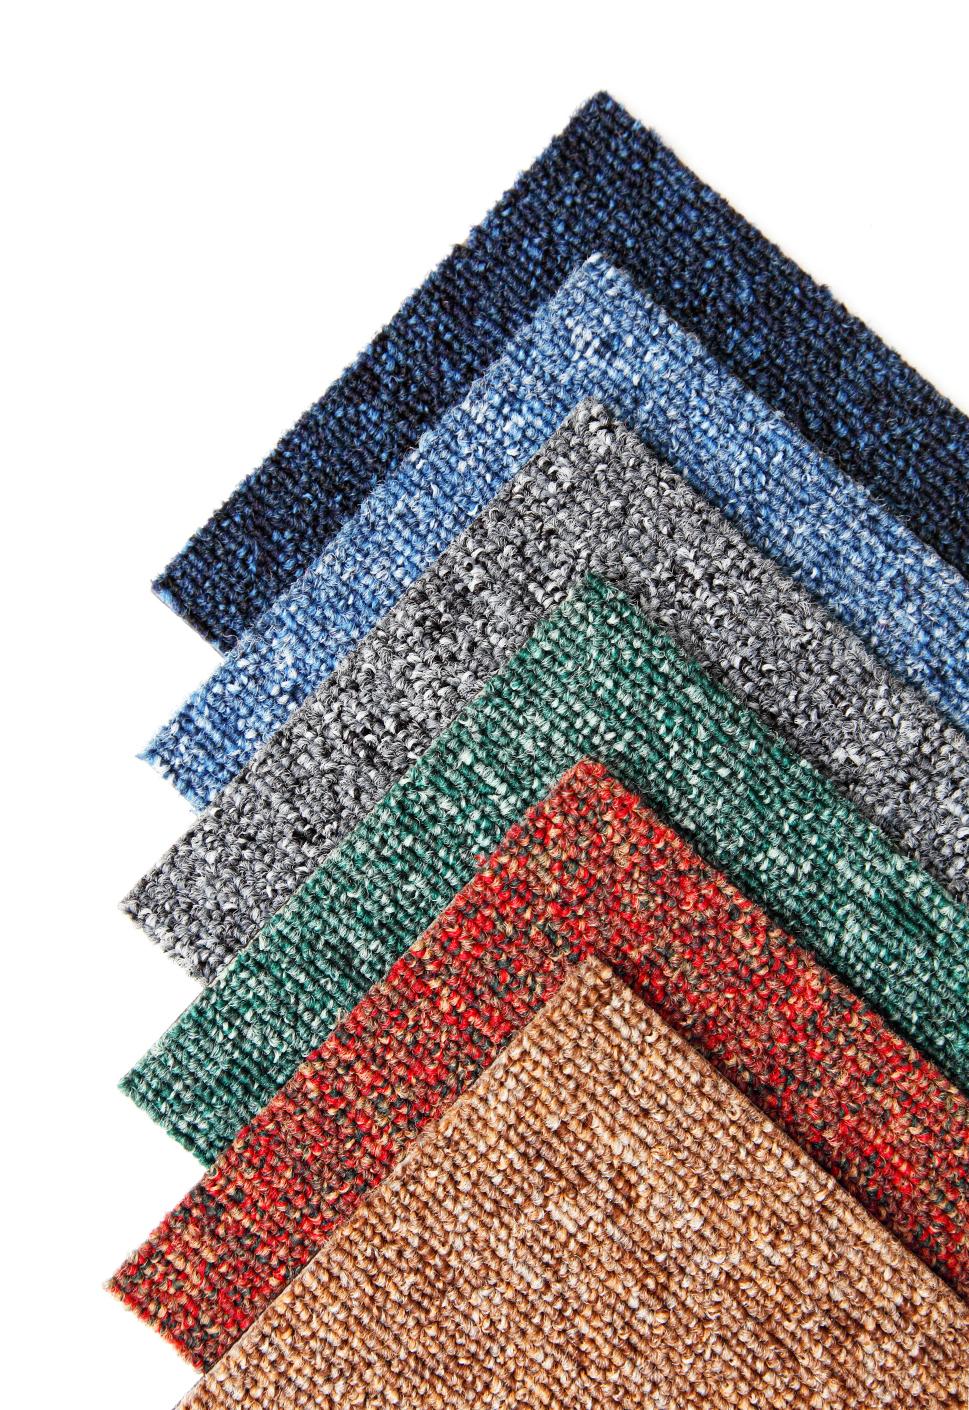 What are Carpet Tiles, and How Can You Select Them for your Home?